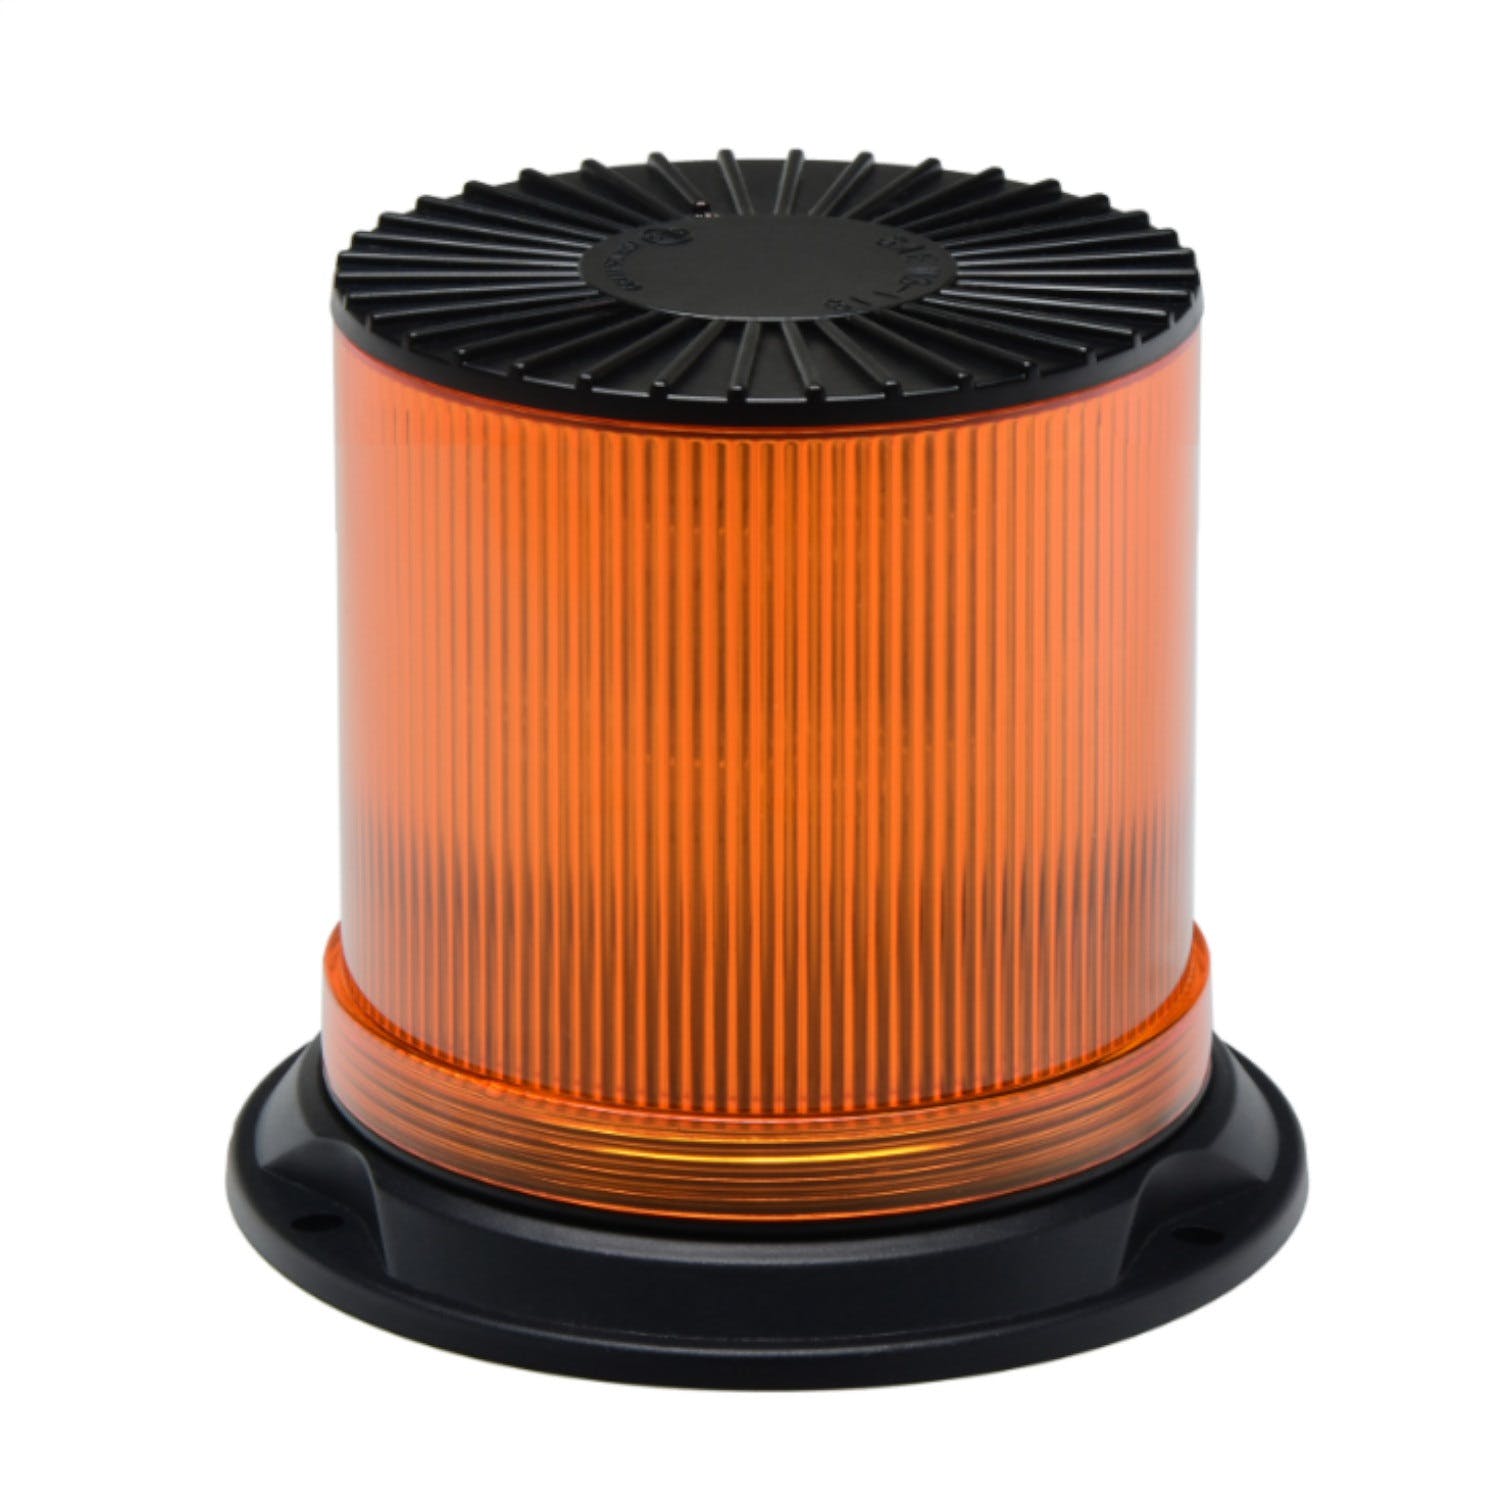 BrightSource S83B16A Large Amber Warning/Safety Beacon